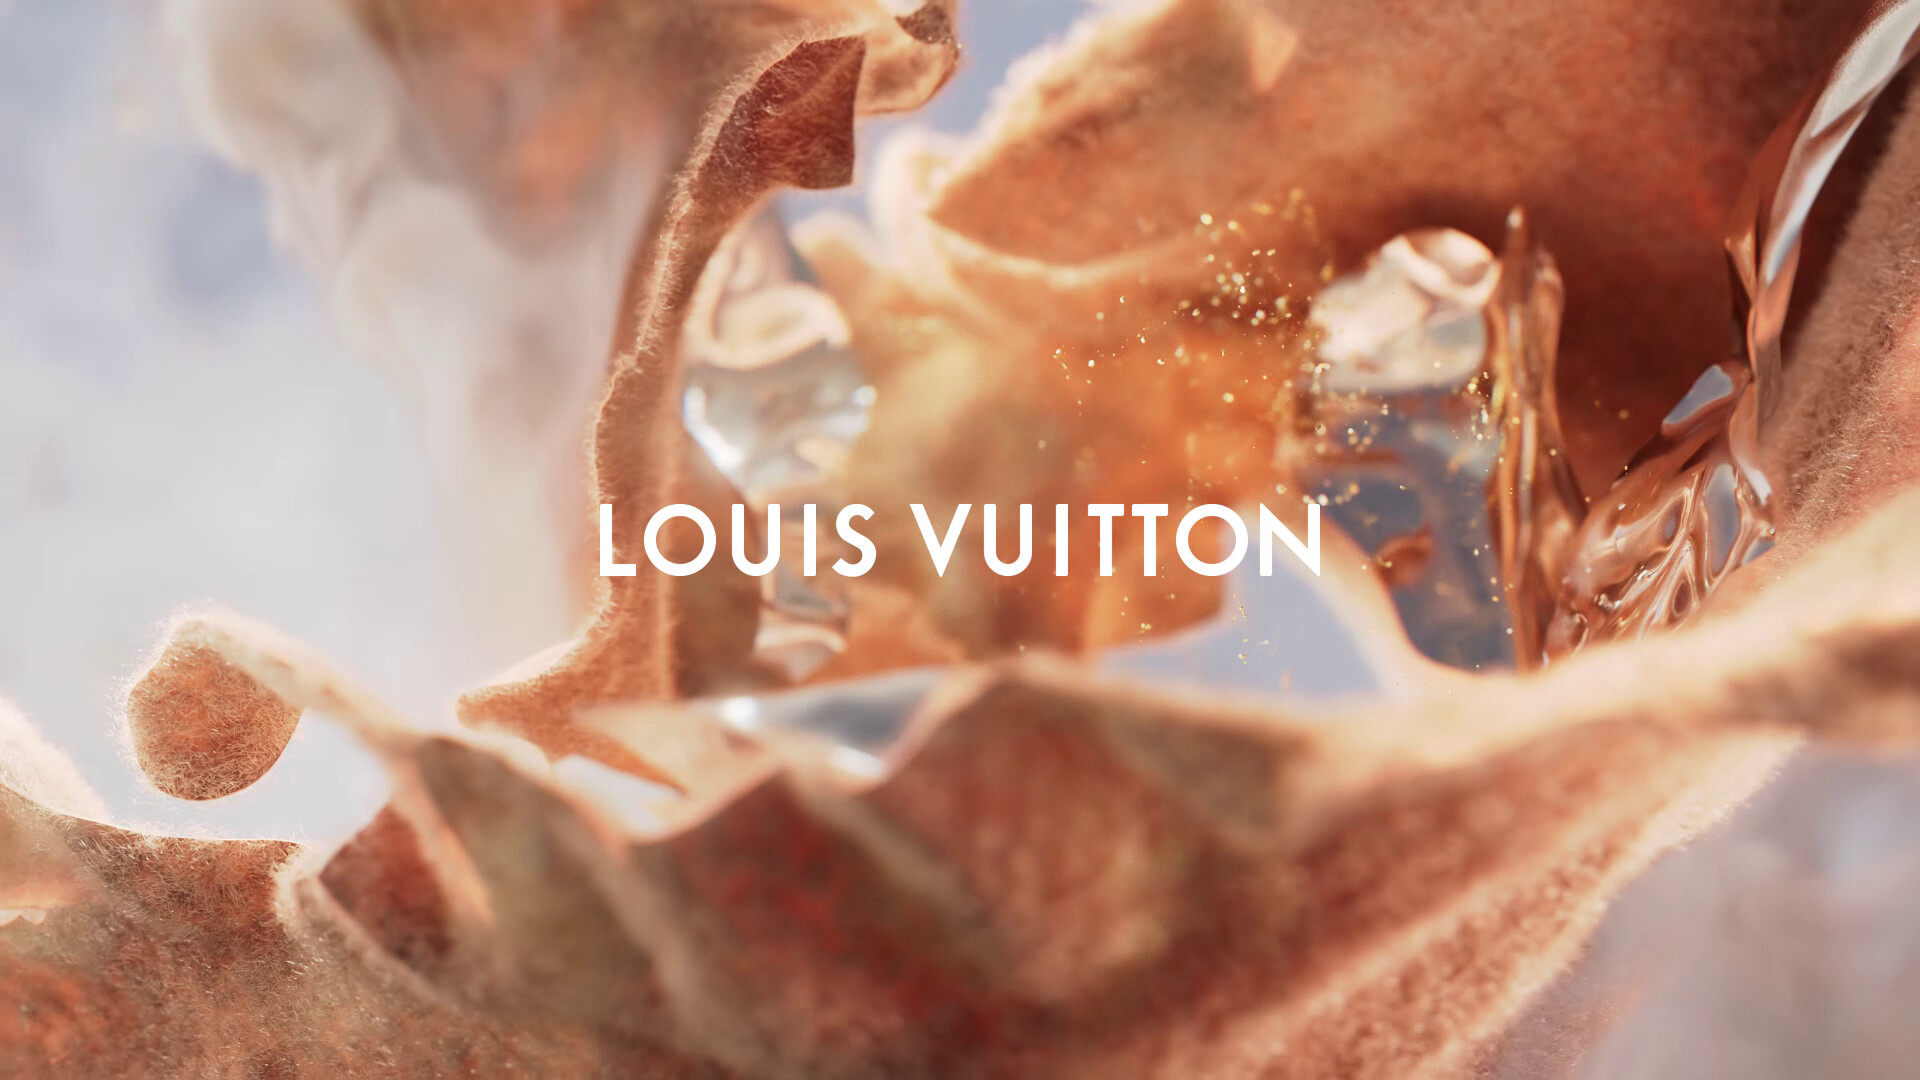 Louis Vuitton Les Extraits Collection Brand Films by Already Been Chewed  - Motion design - STASH : Motion design – STASH